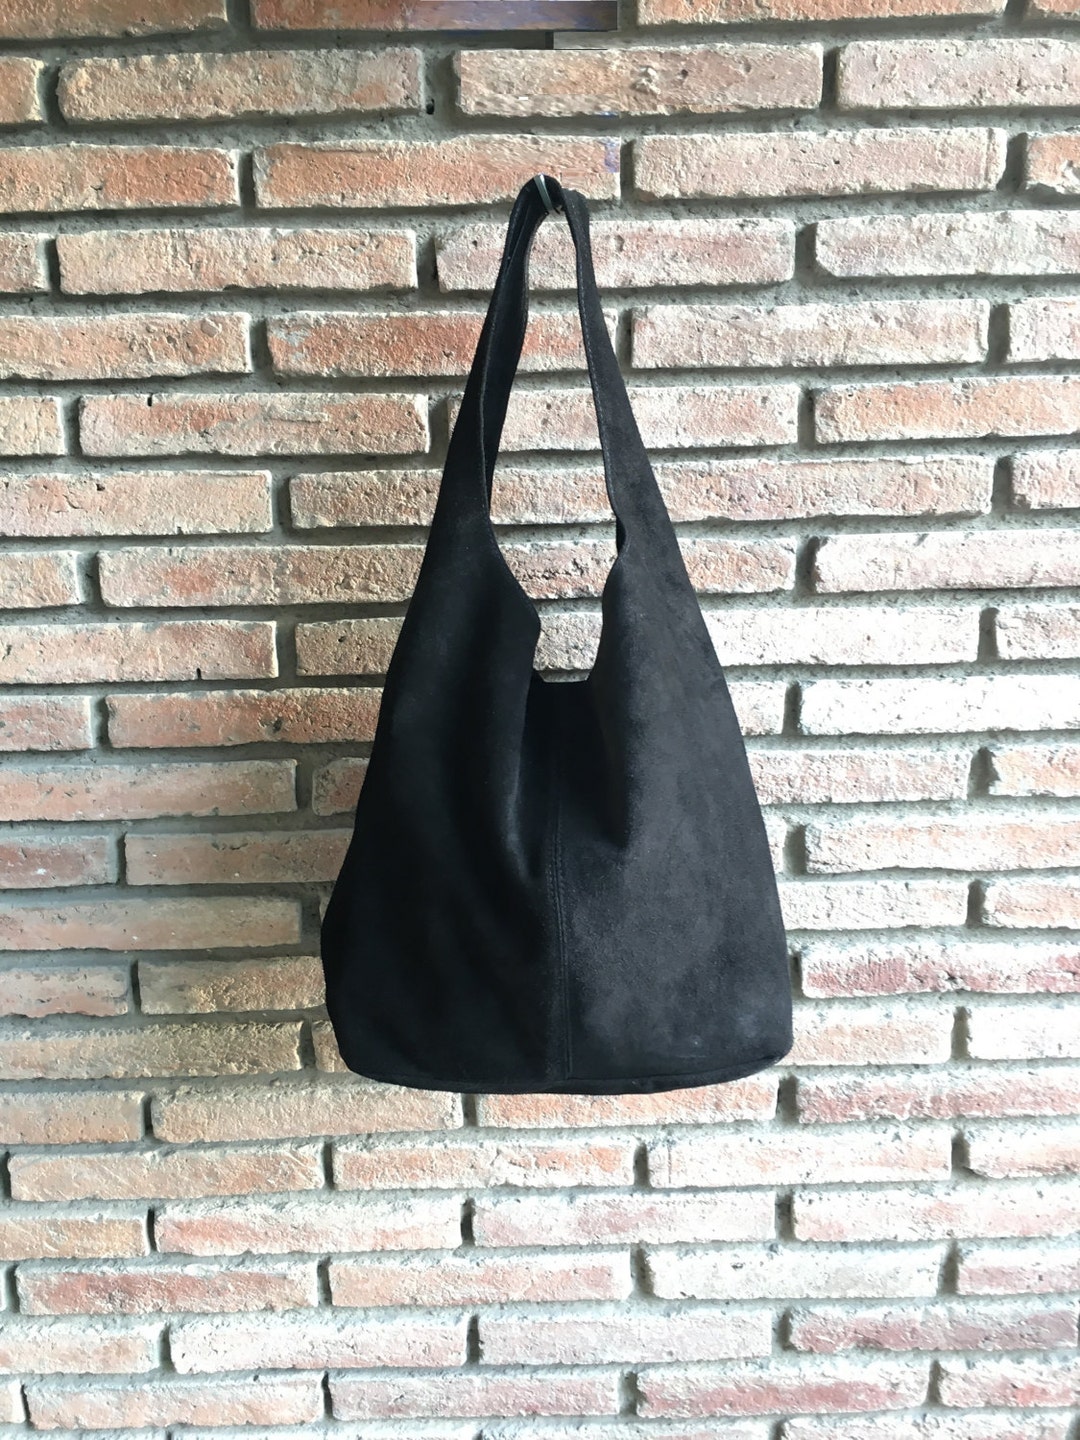 Slouch Bag.large TOTE Leather Bag in BLACK. Soft Natural Suede